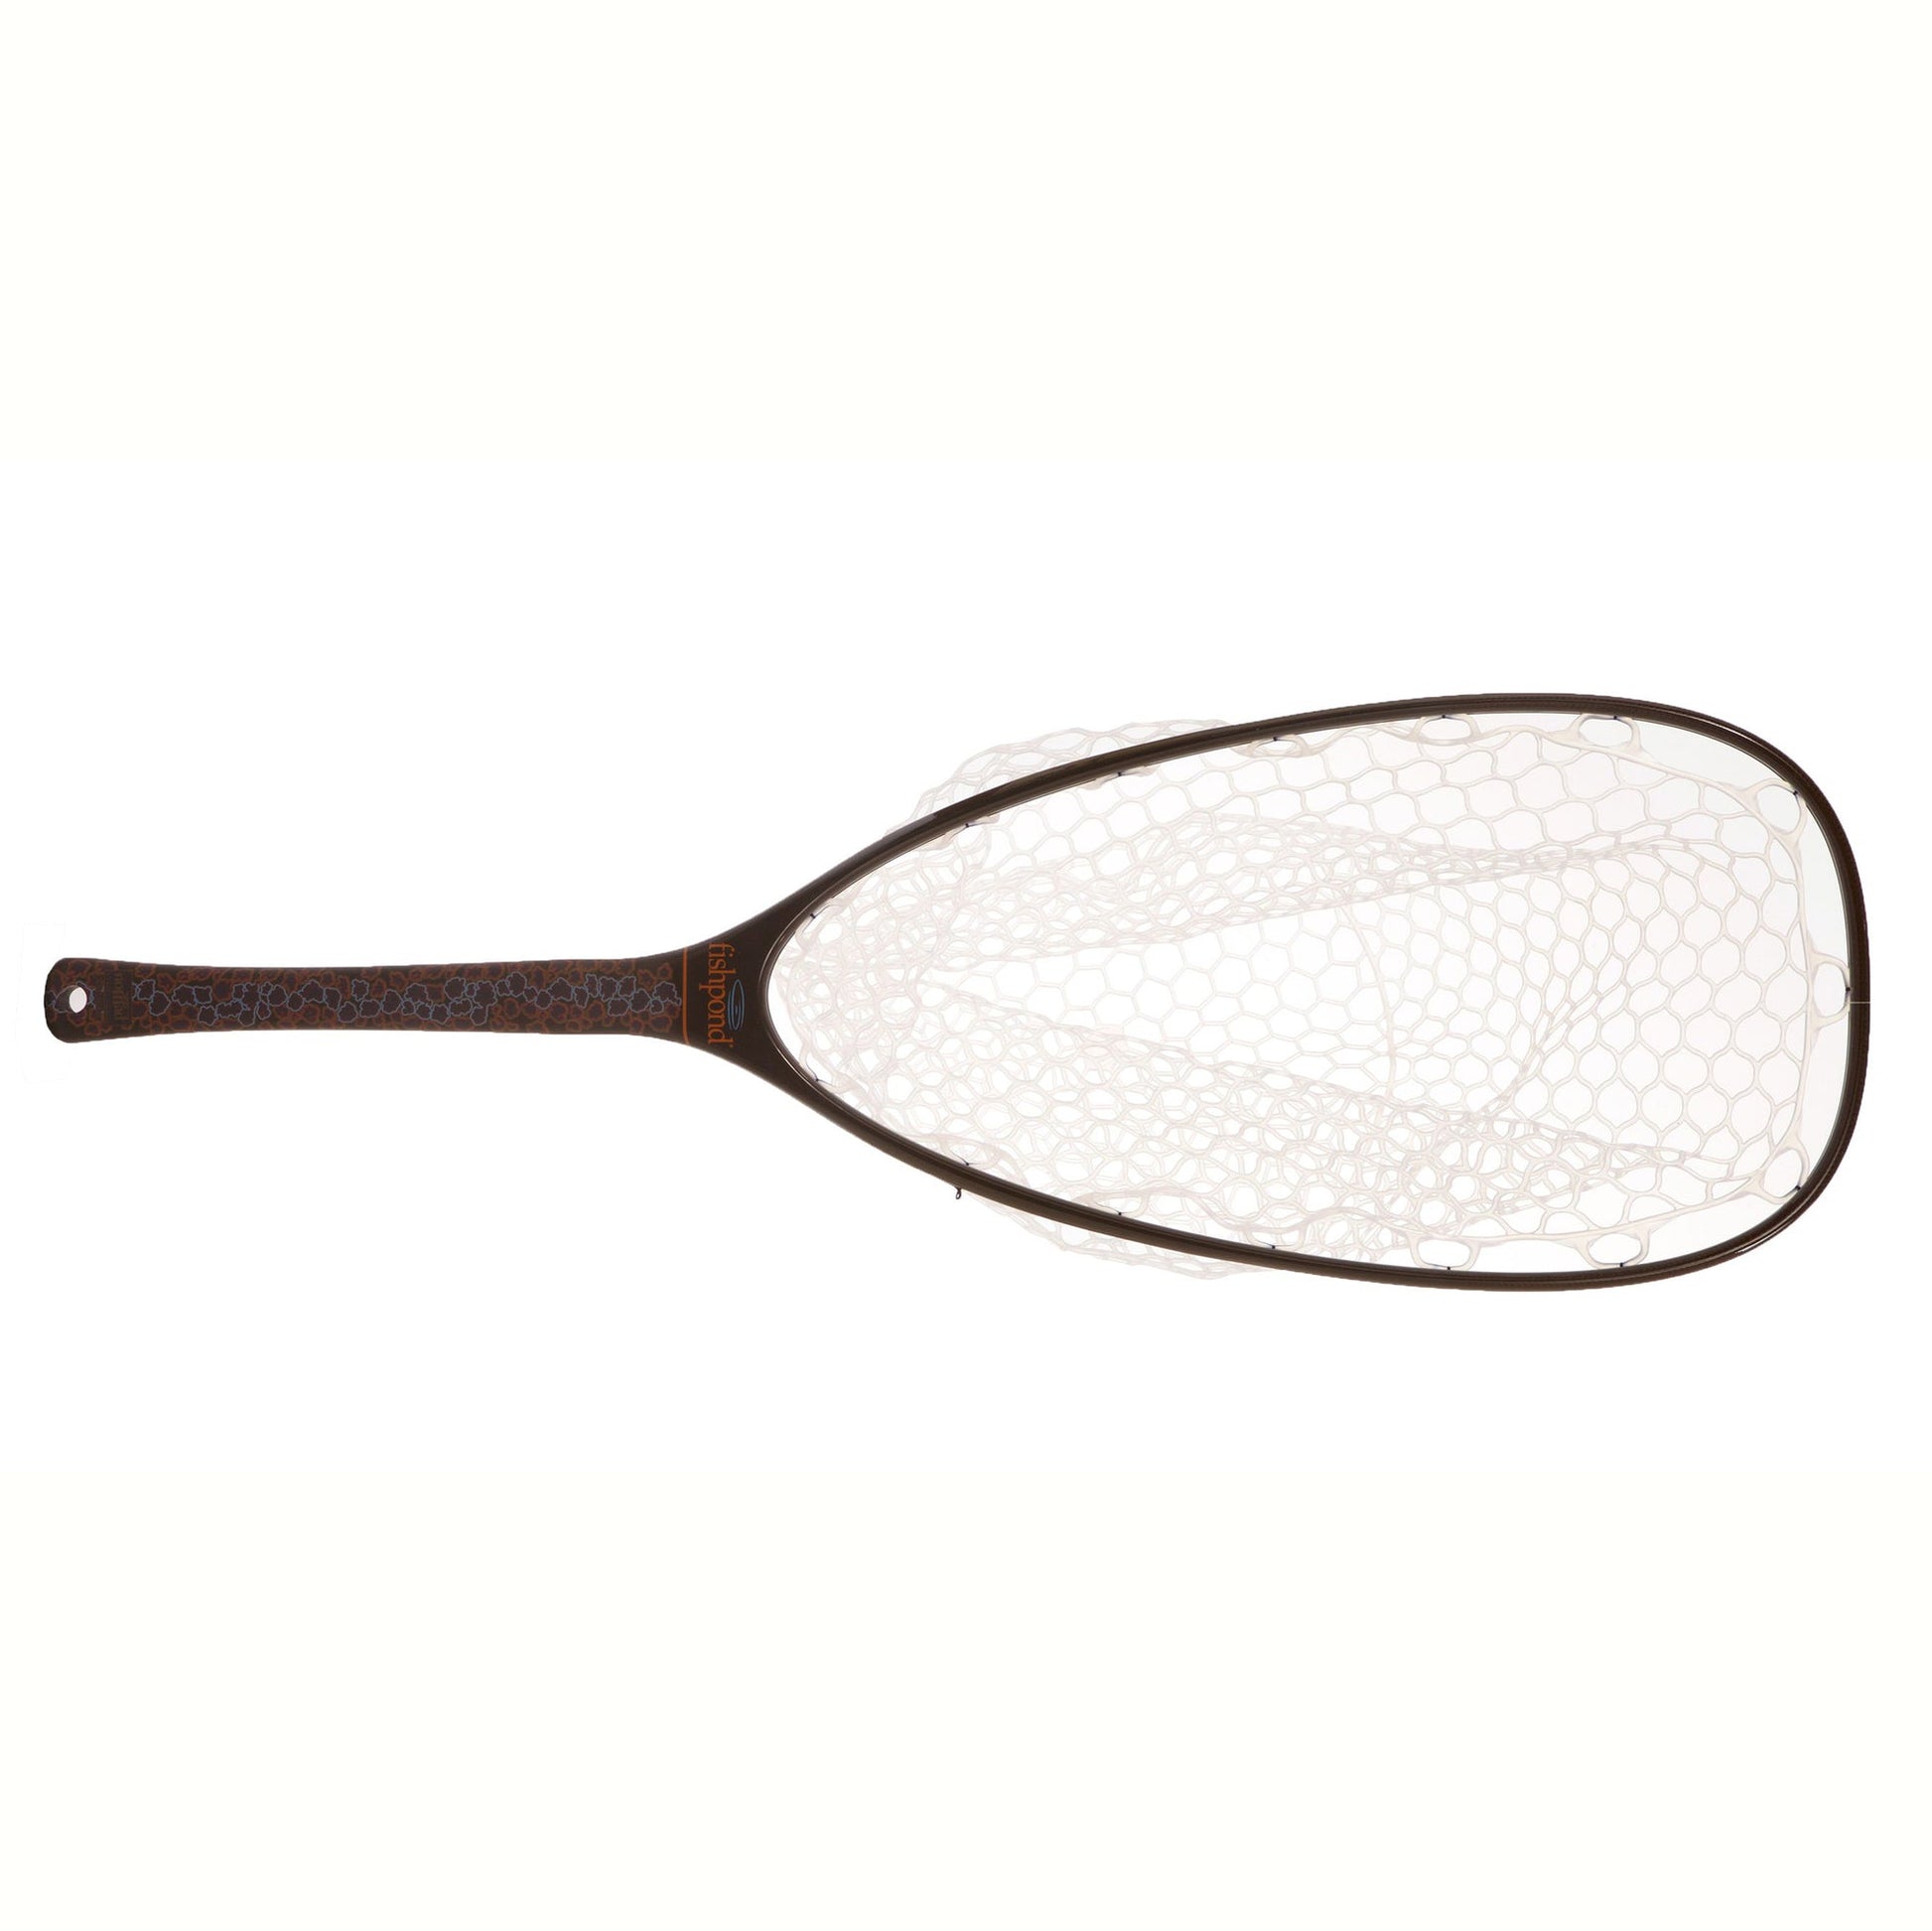 Fishpond Nomad Emerger Net – charliesflybox